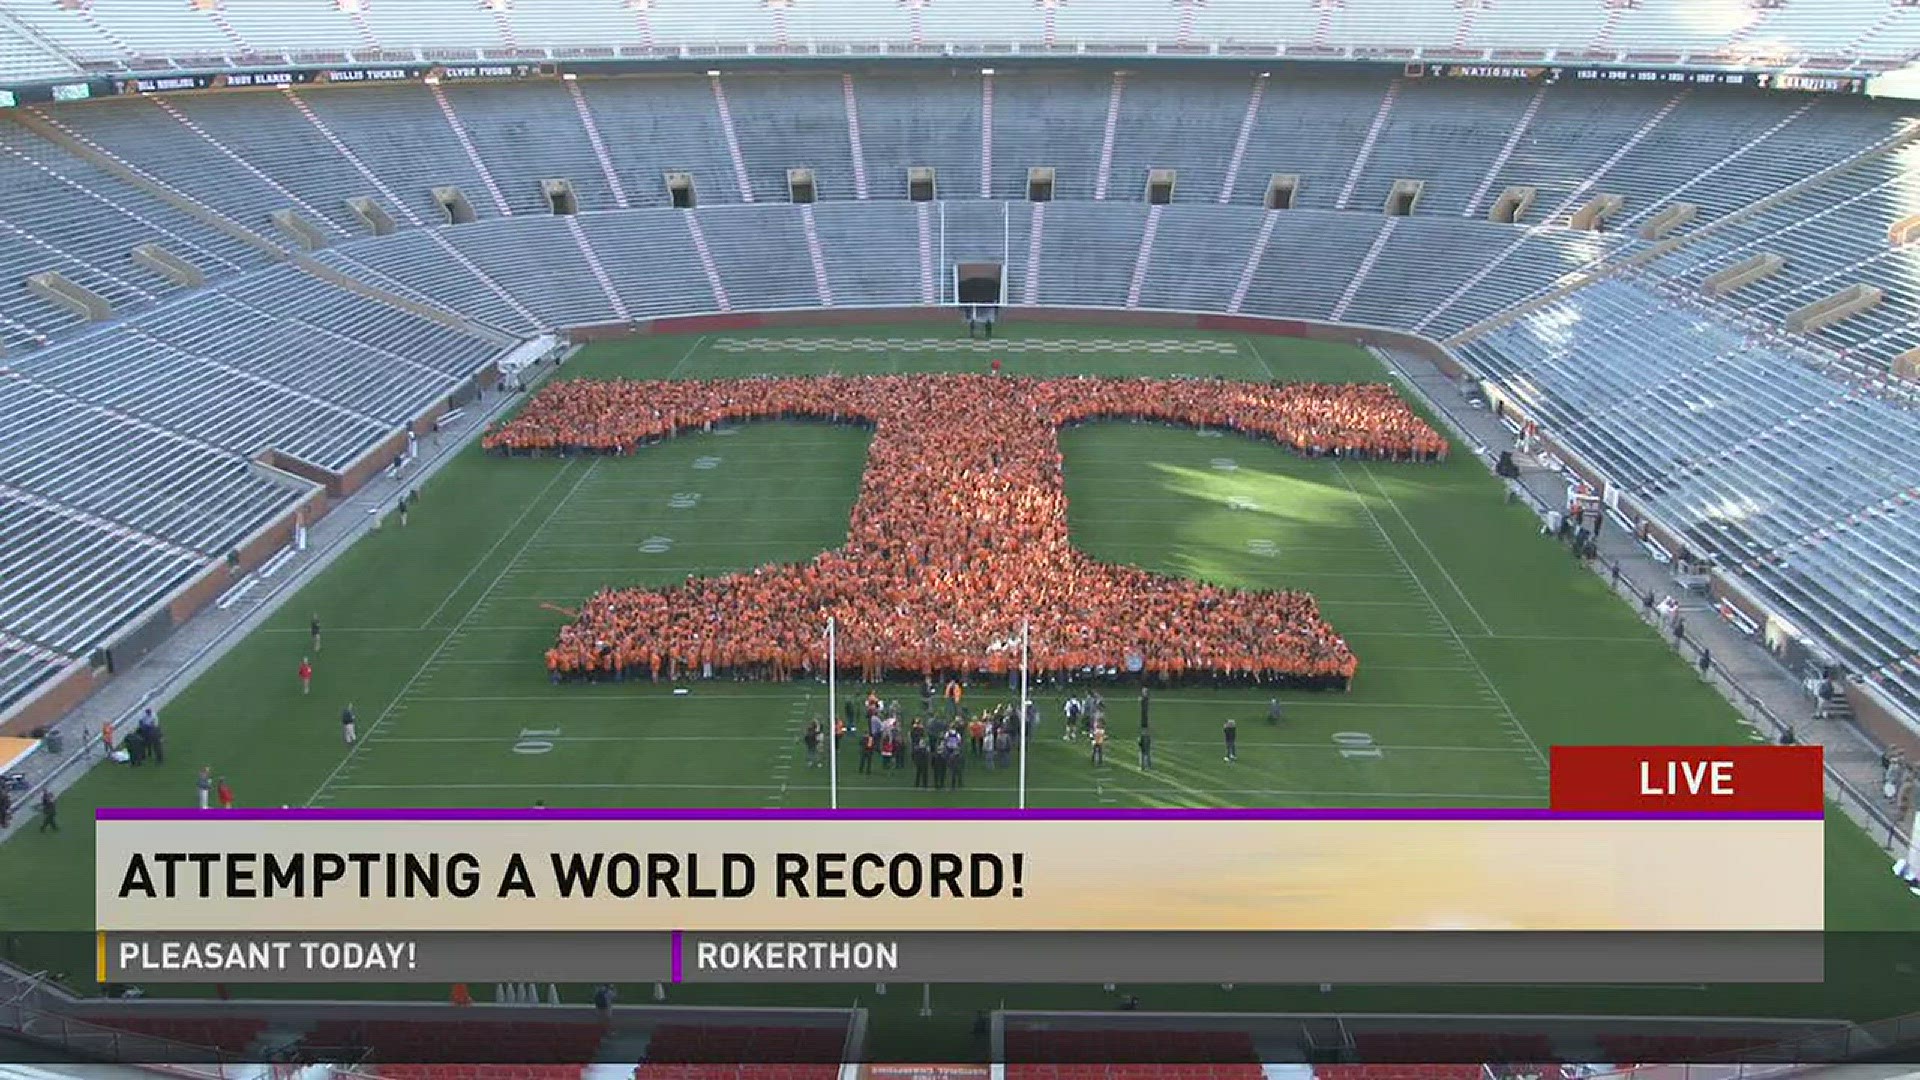 The University of Tennessee set a world record at Neyland Stadium on Wednesday for the largest human letter.